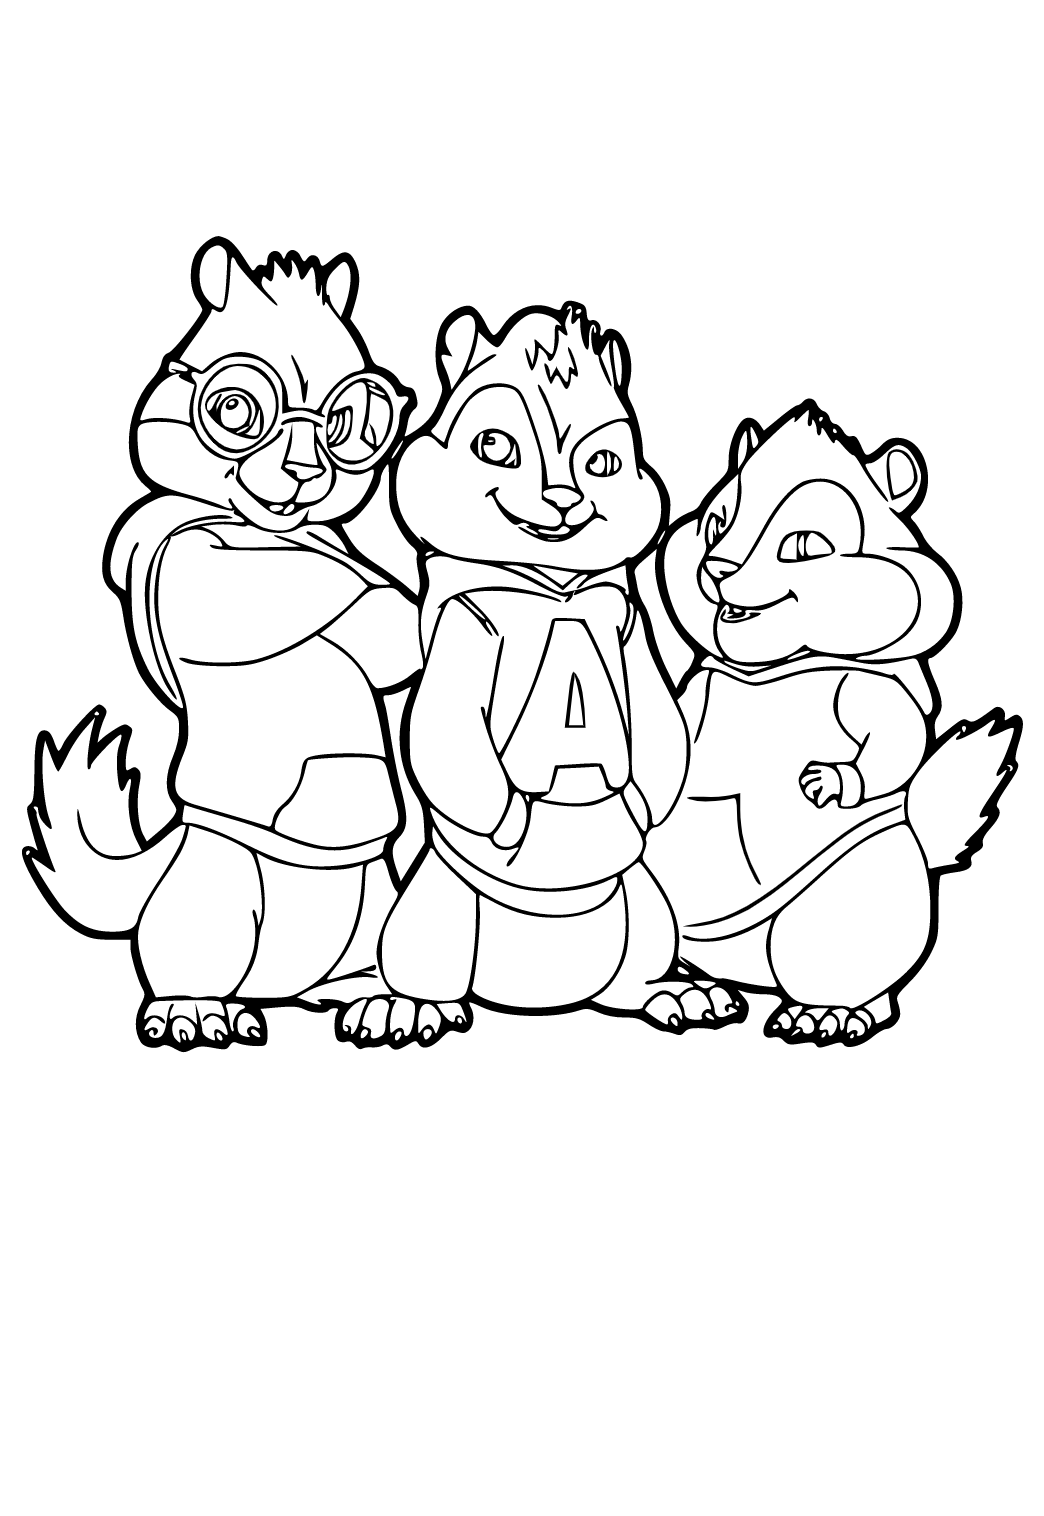 Free printable alvin and the chipmunks friends coloring page sheet and picture for adults and kids girls and boys